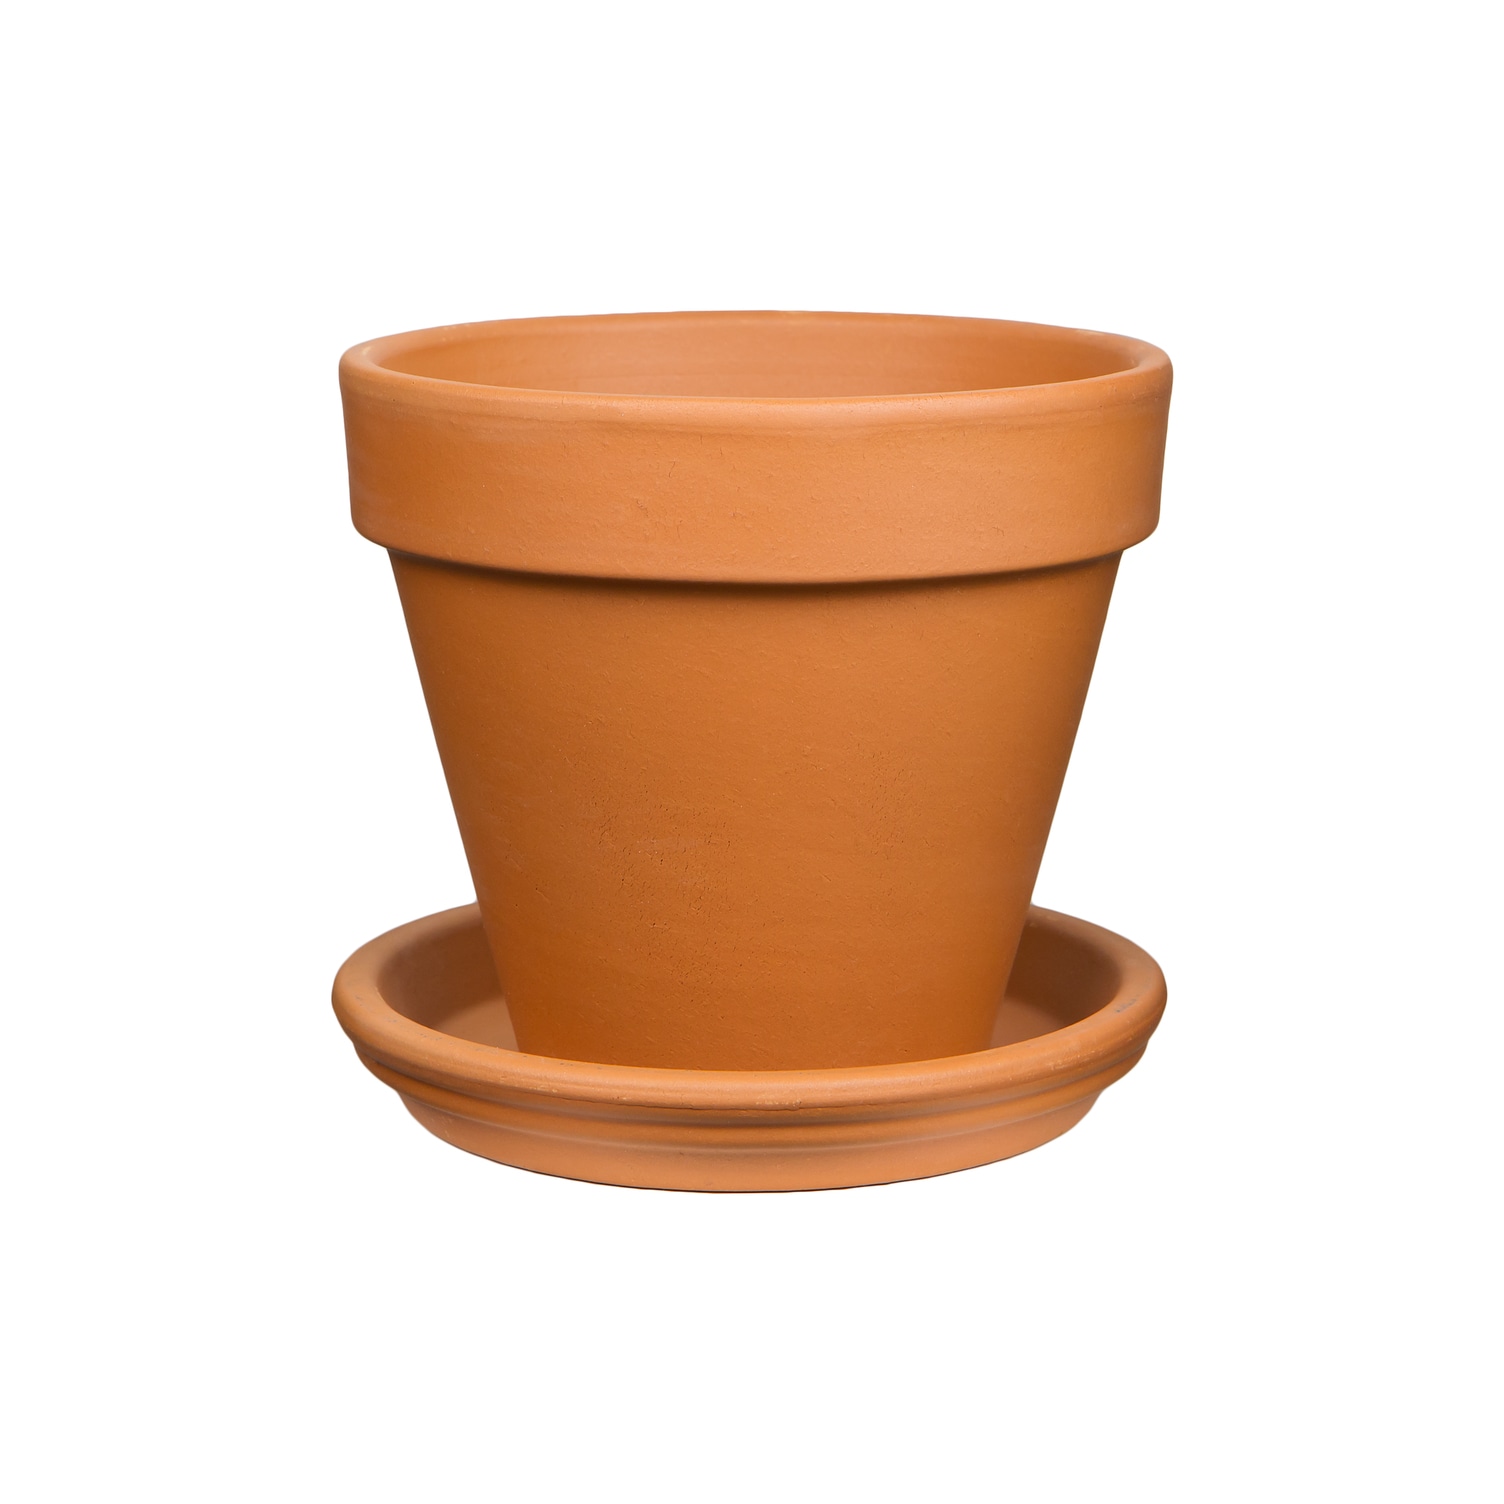 Plant Terracotta 14-in Saucers the Pennington Clay at in department Saucer Plant